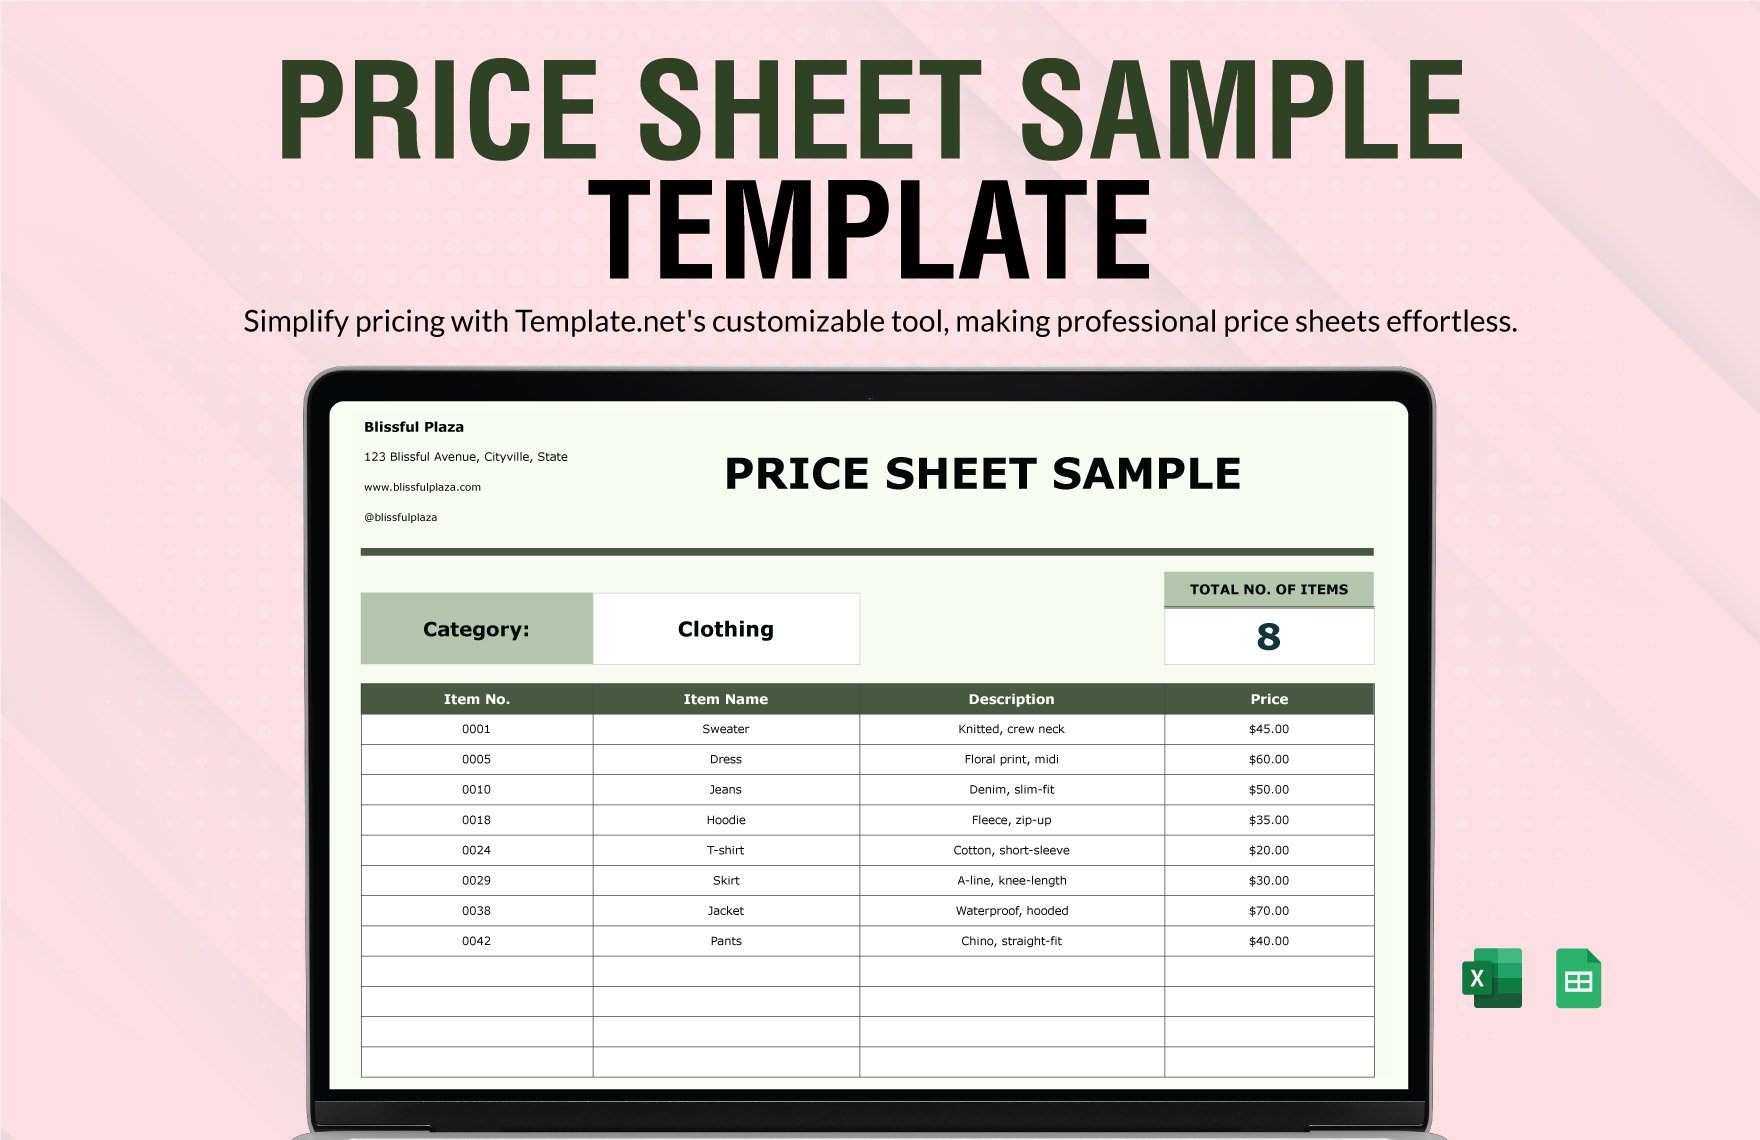 Price Sheet Sample Template in Excel, Google Sheets